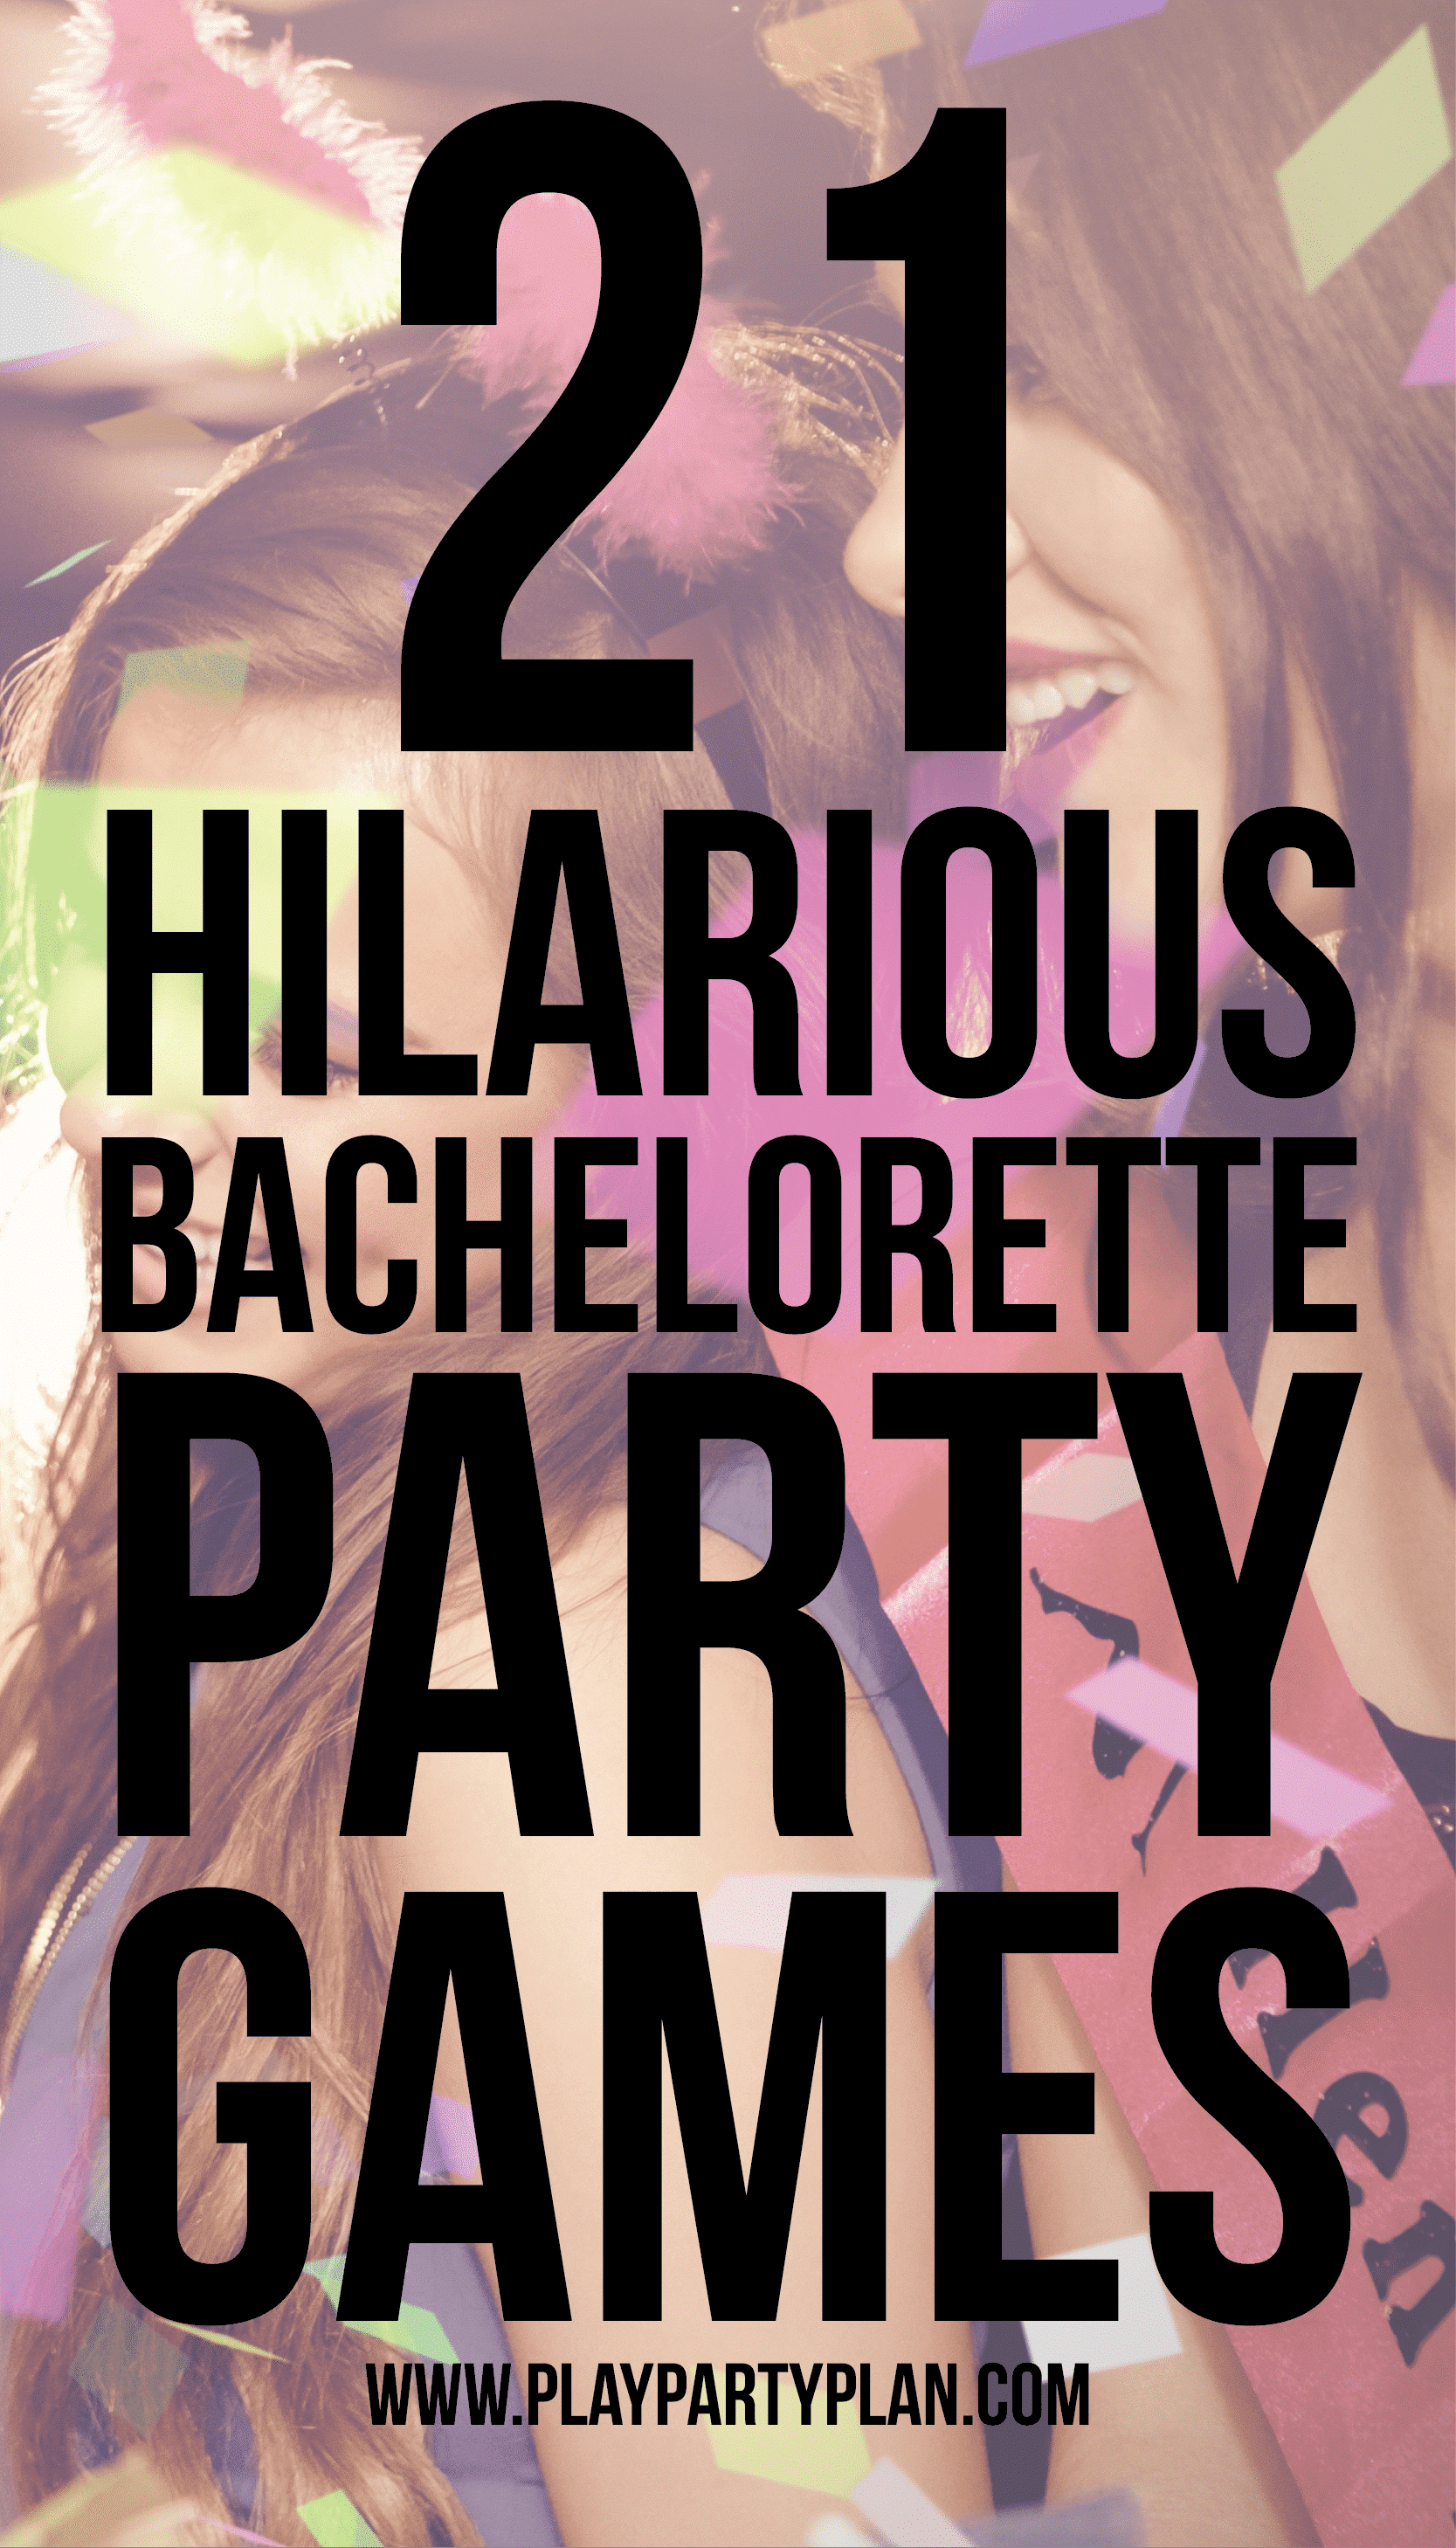 Bachelorette party games clean enough for anyone to play